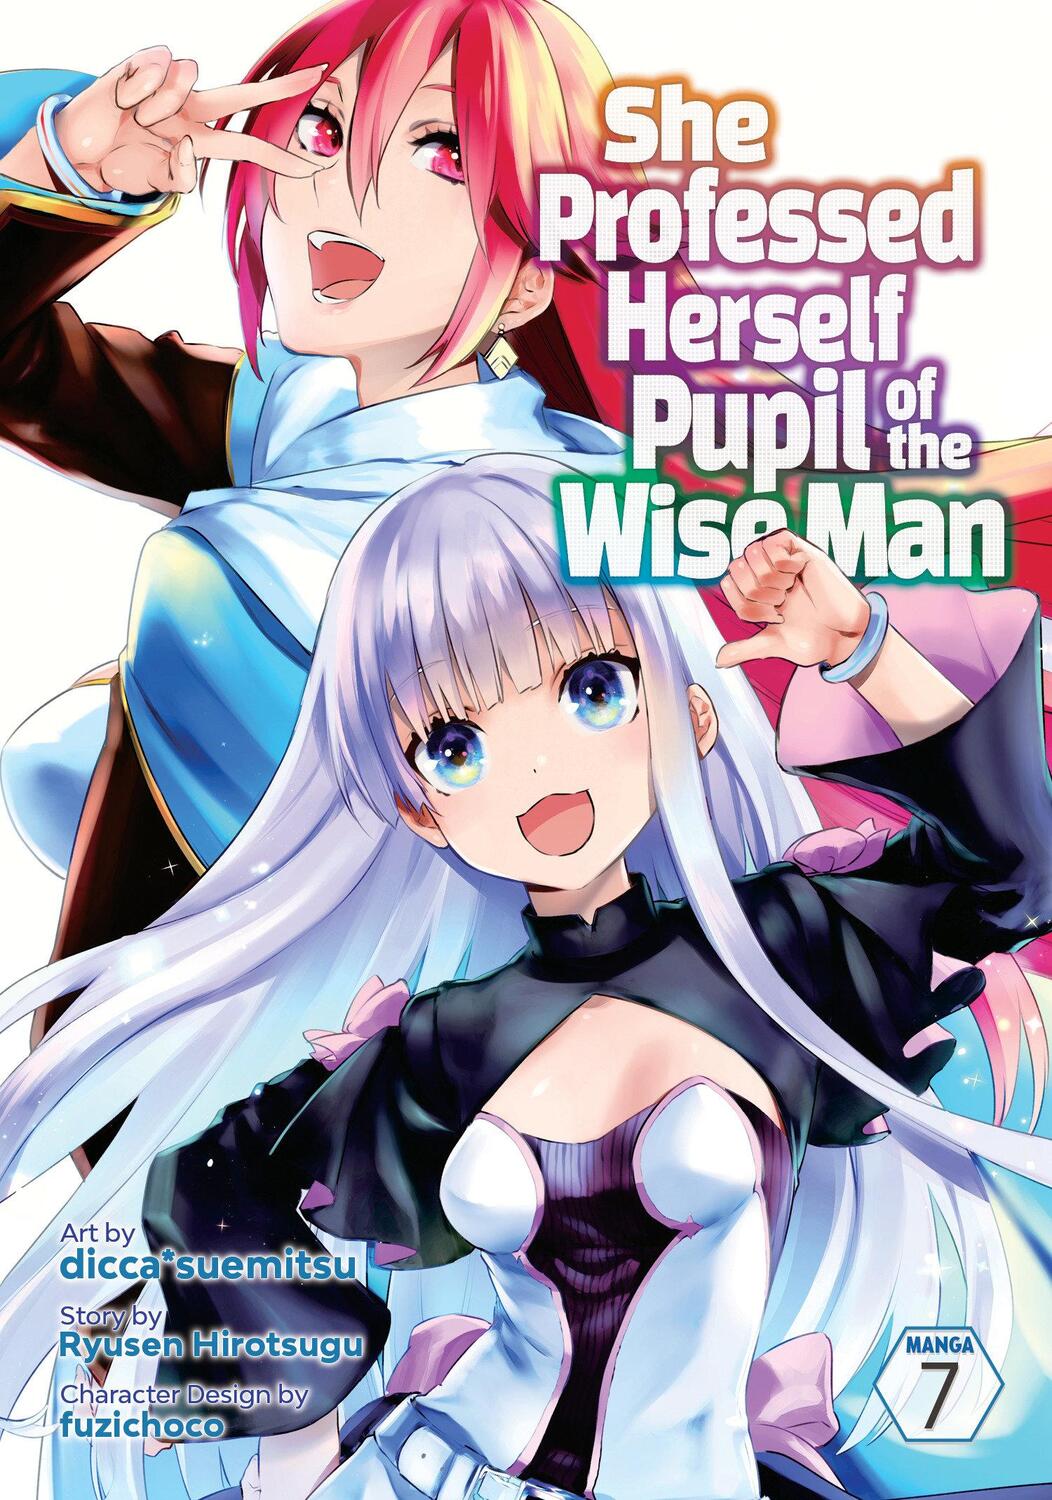 Cover: 9781638586951 | She Professed Herself Pupil of the Wise Man (Manga) Vol. 7 | Hirotsugu